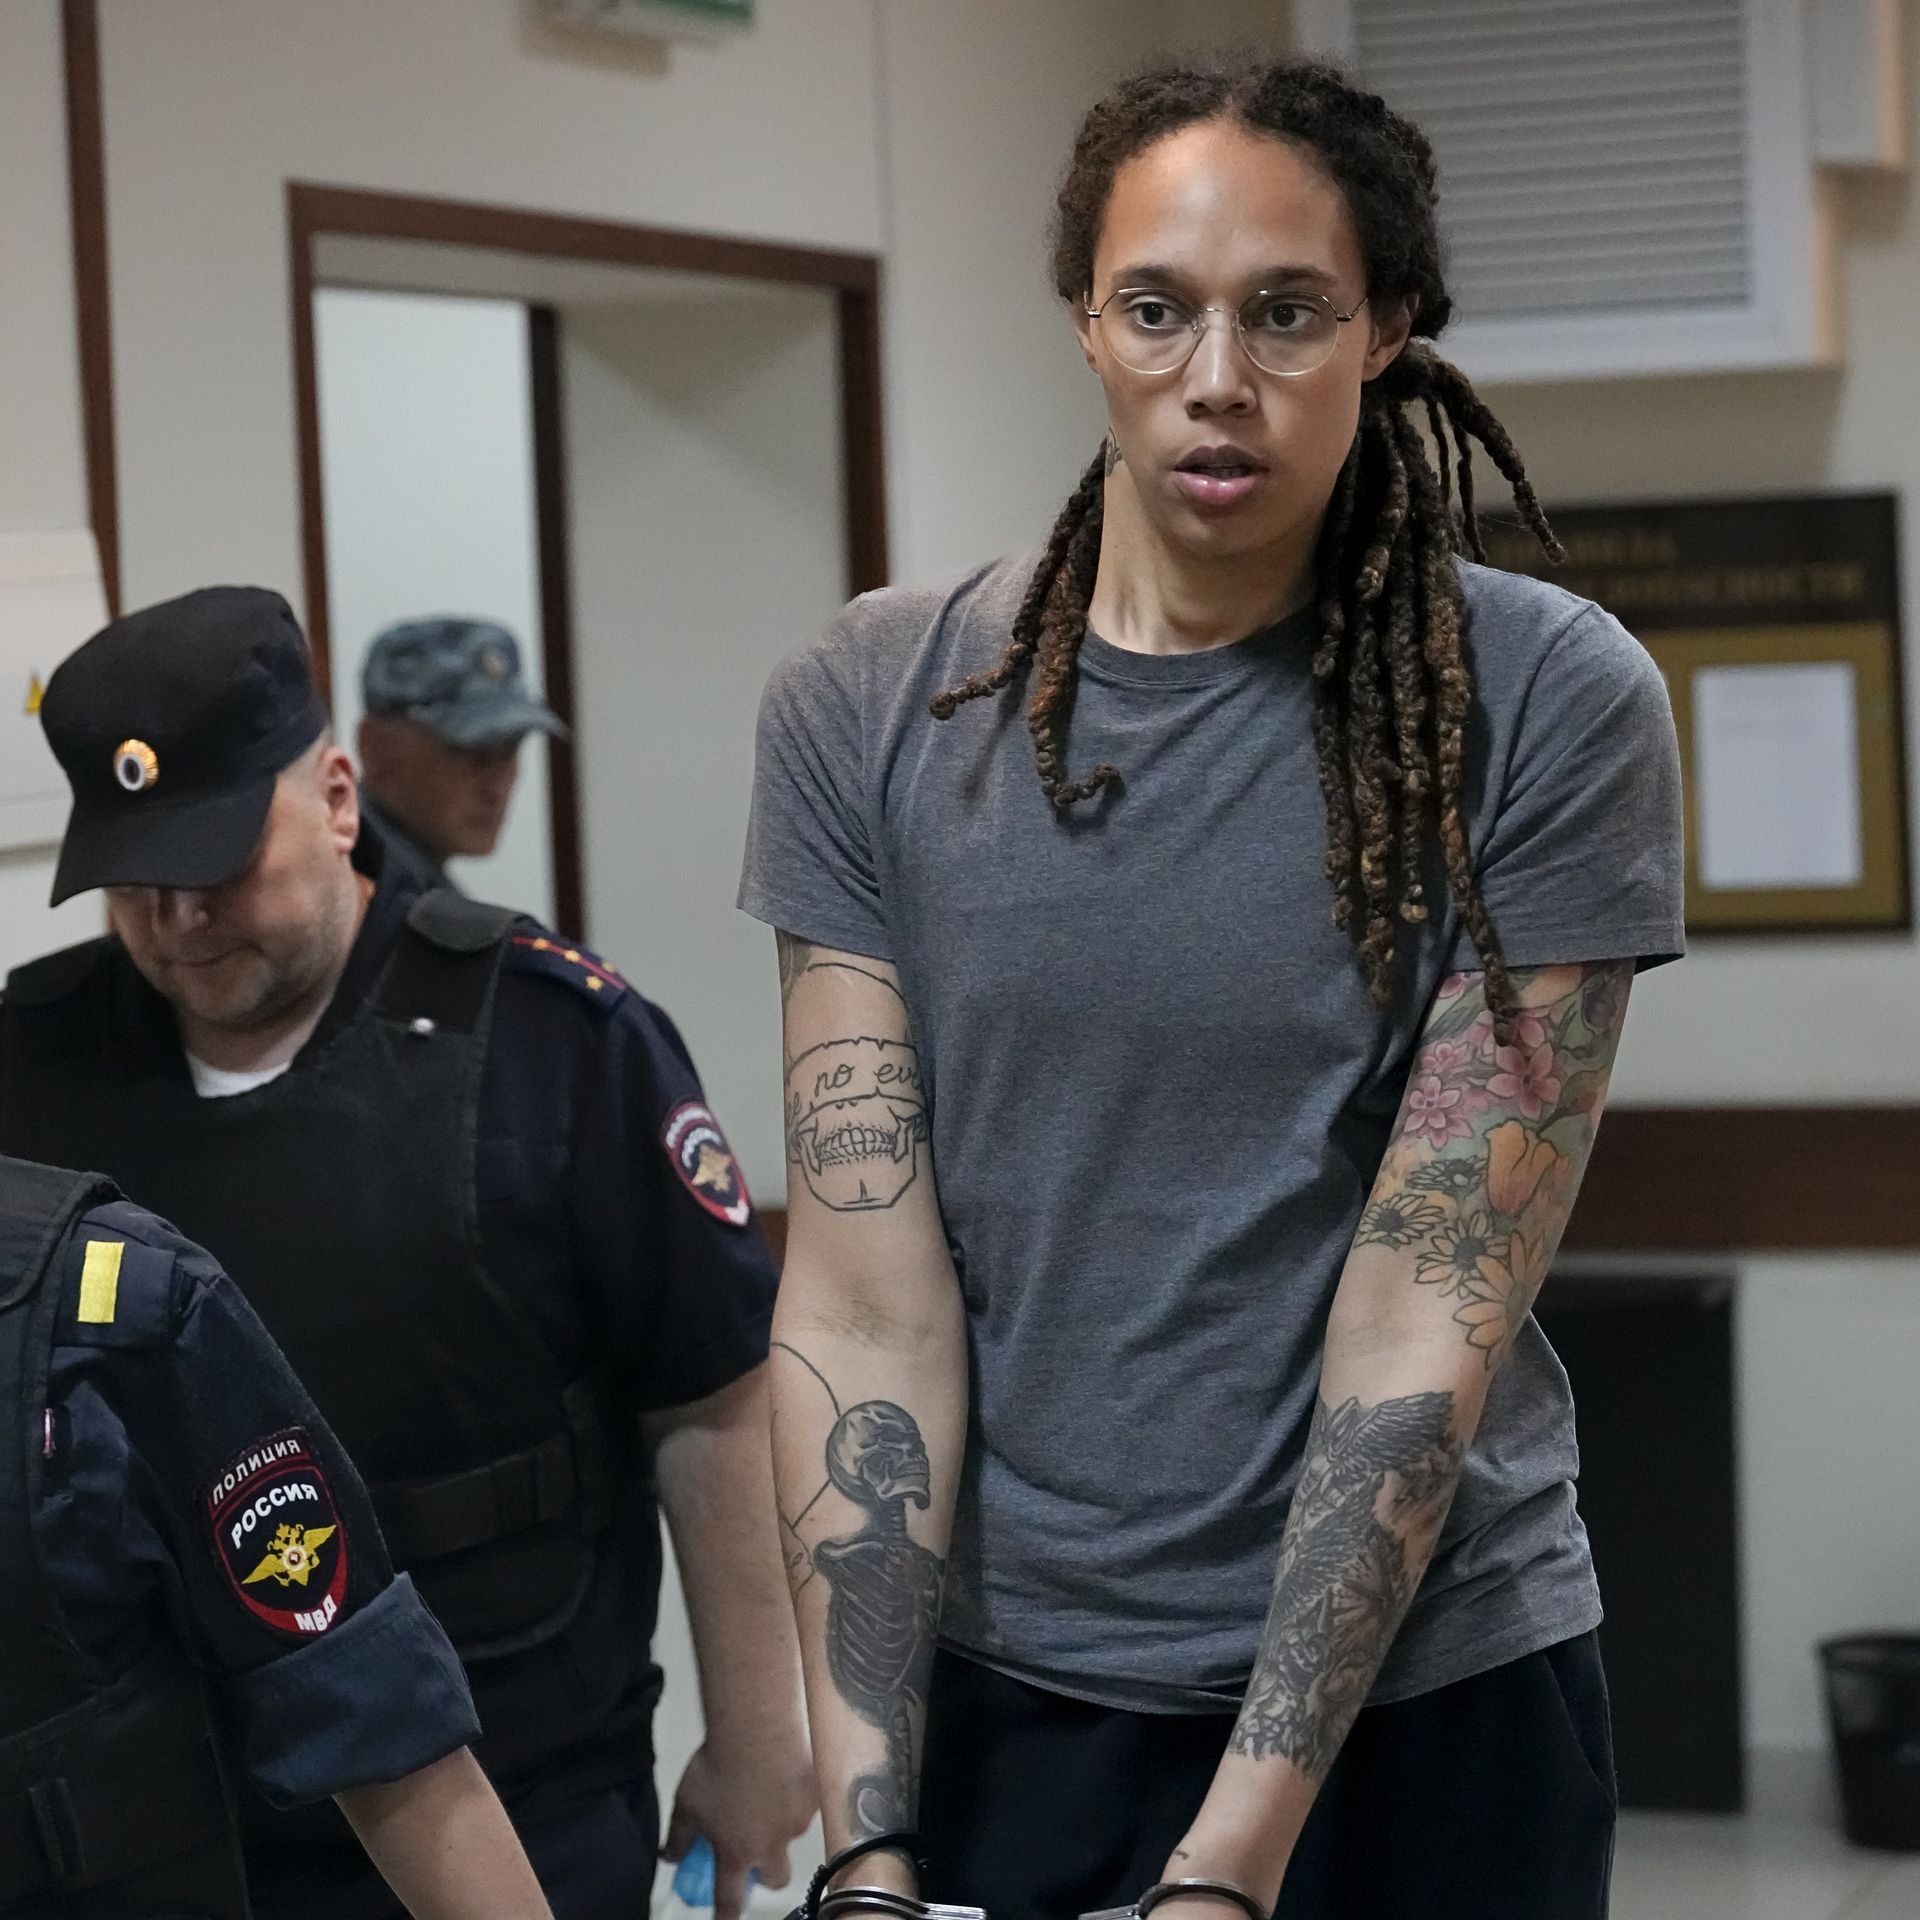 Guards escort Brittney Griner from a Russian courtroom